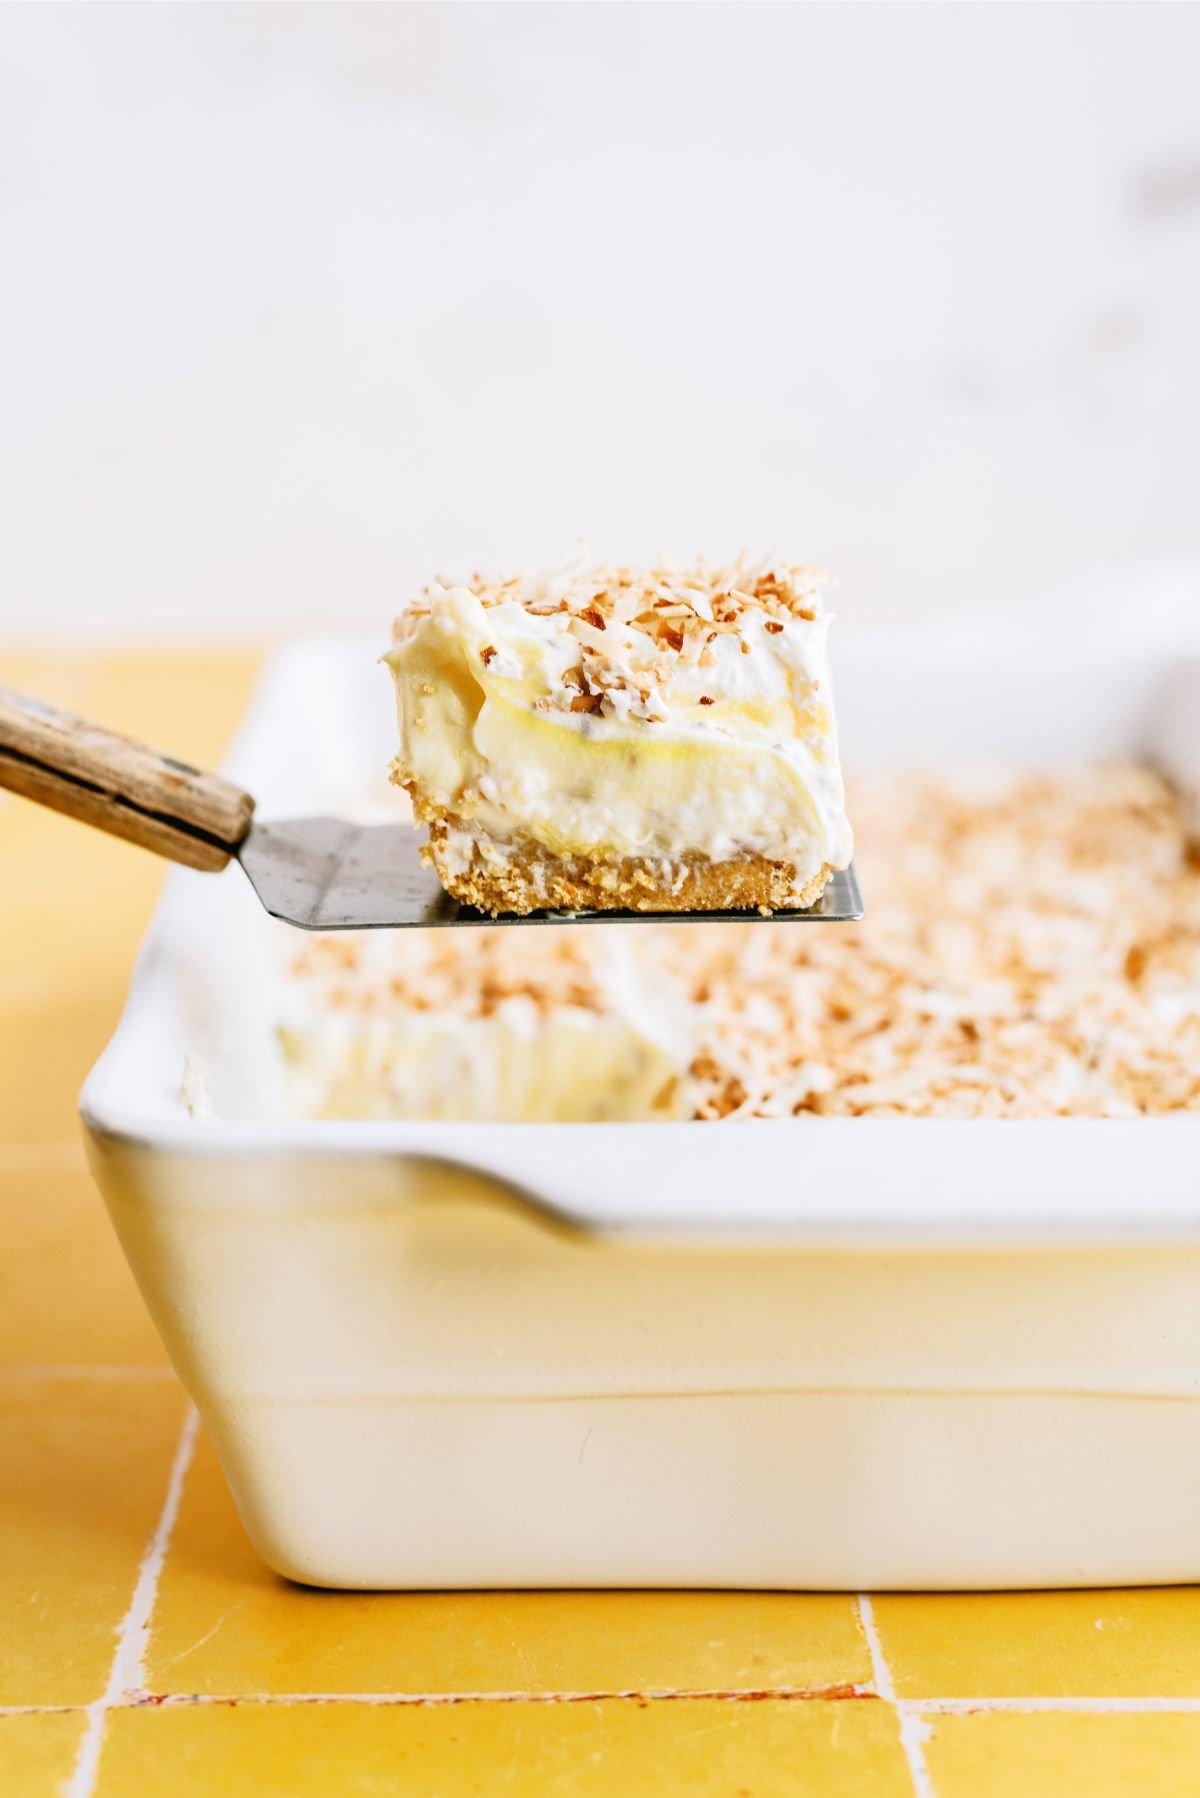 A pan of Layered Pina Colada Dessert Recipe (Lush) with a square being lifted out